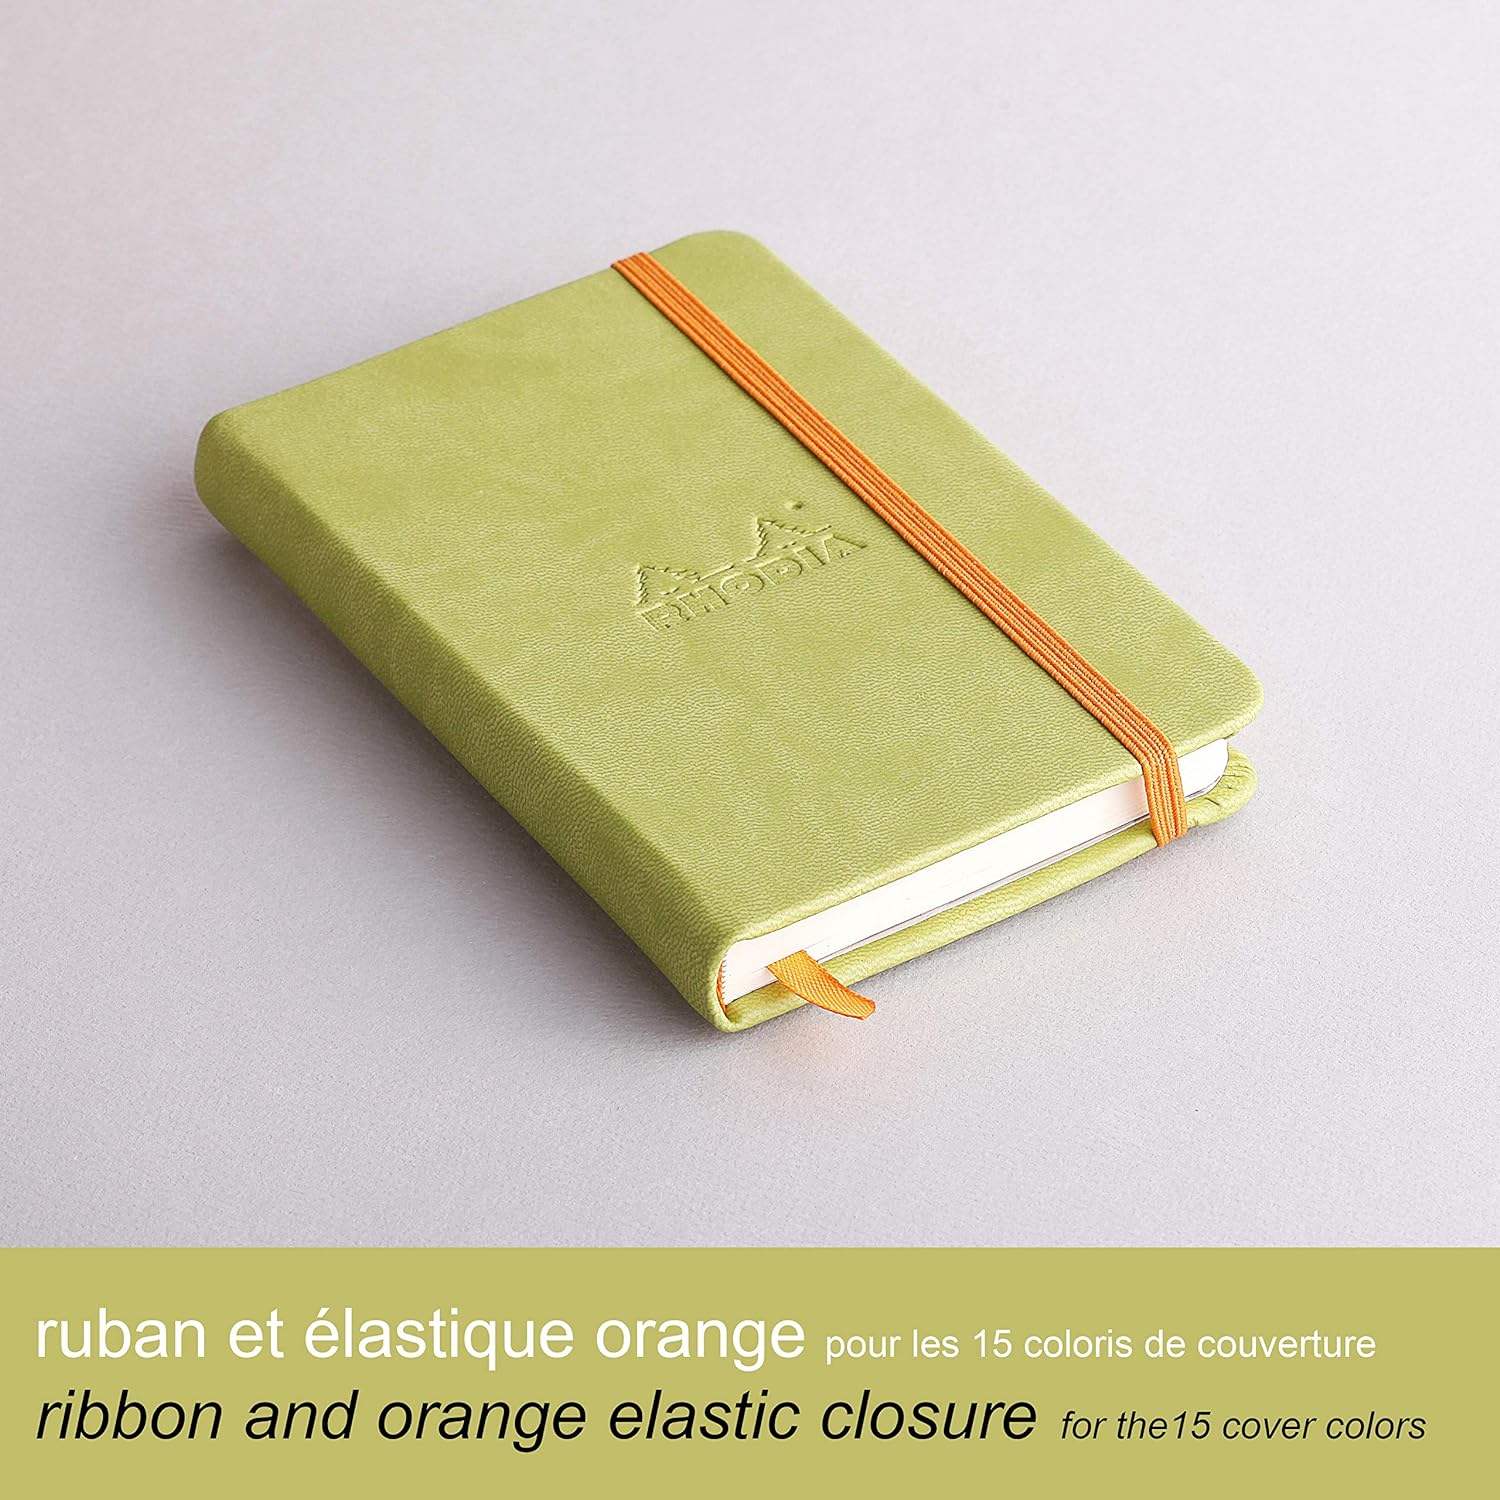 RHODIArama Webnotebook A6 Ivory Lined Hardcover-Anise Green